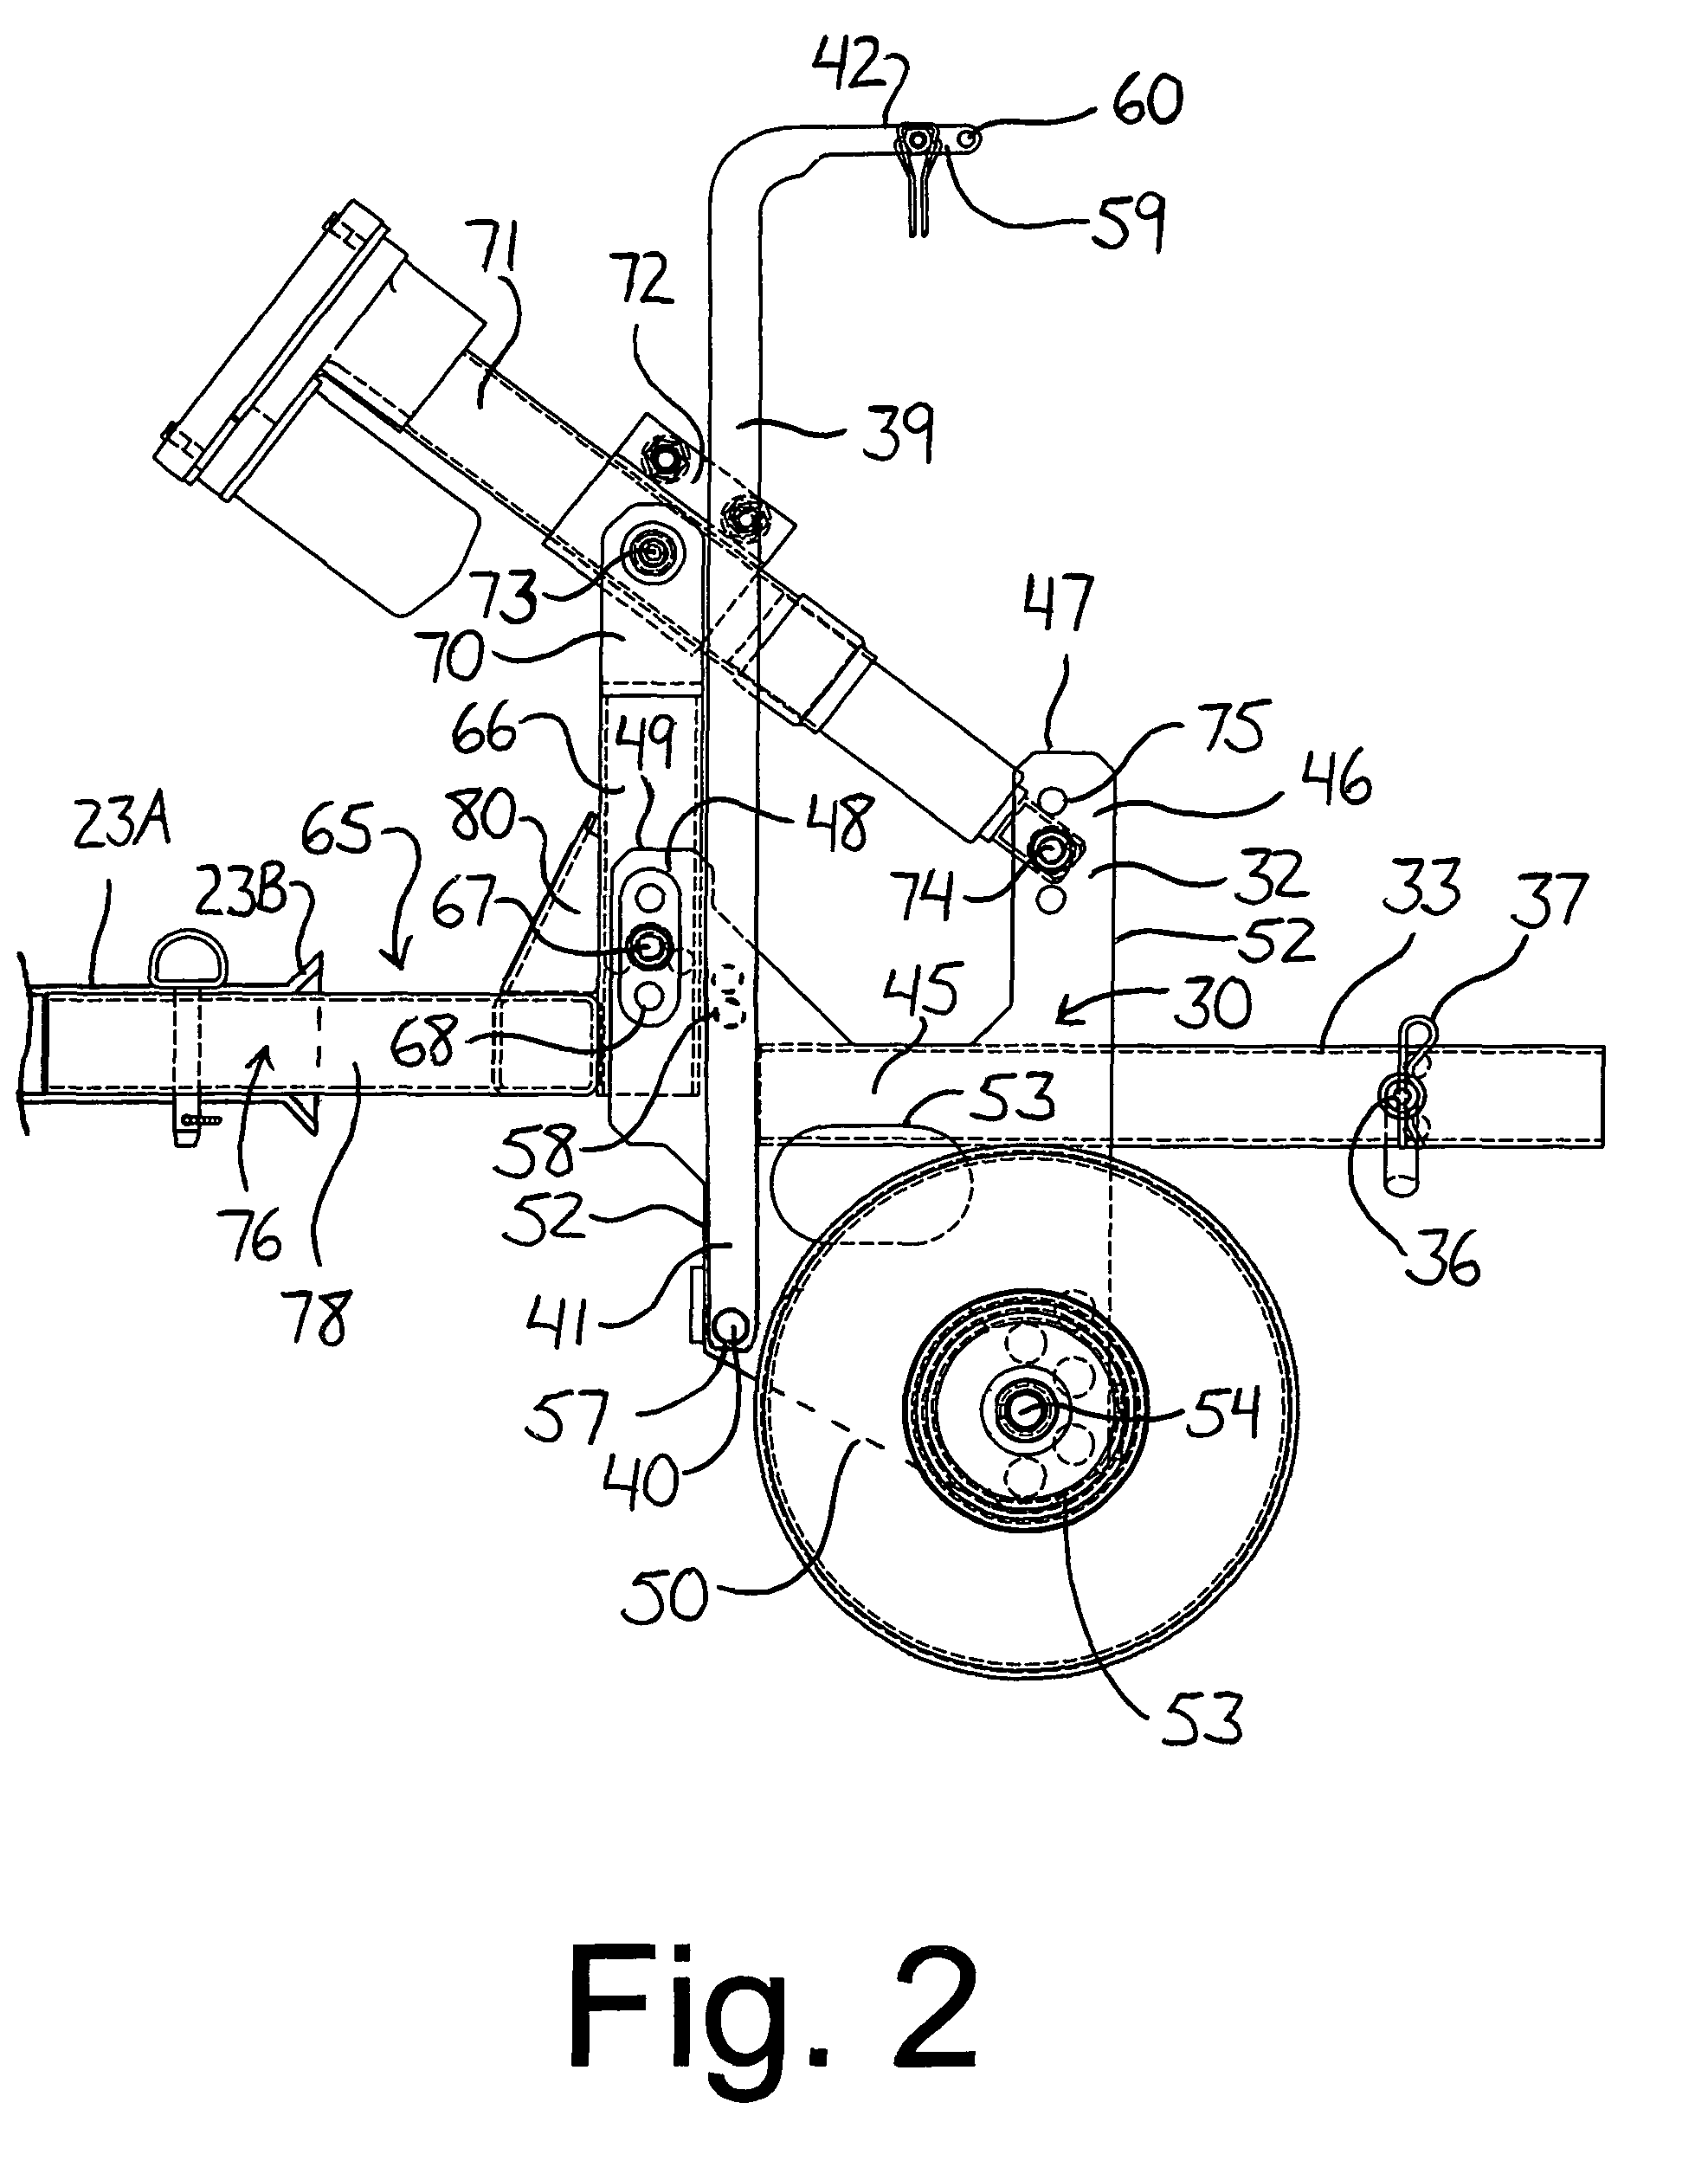 Hitch attachment for mounting of an accessory of an ATV